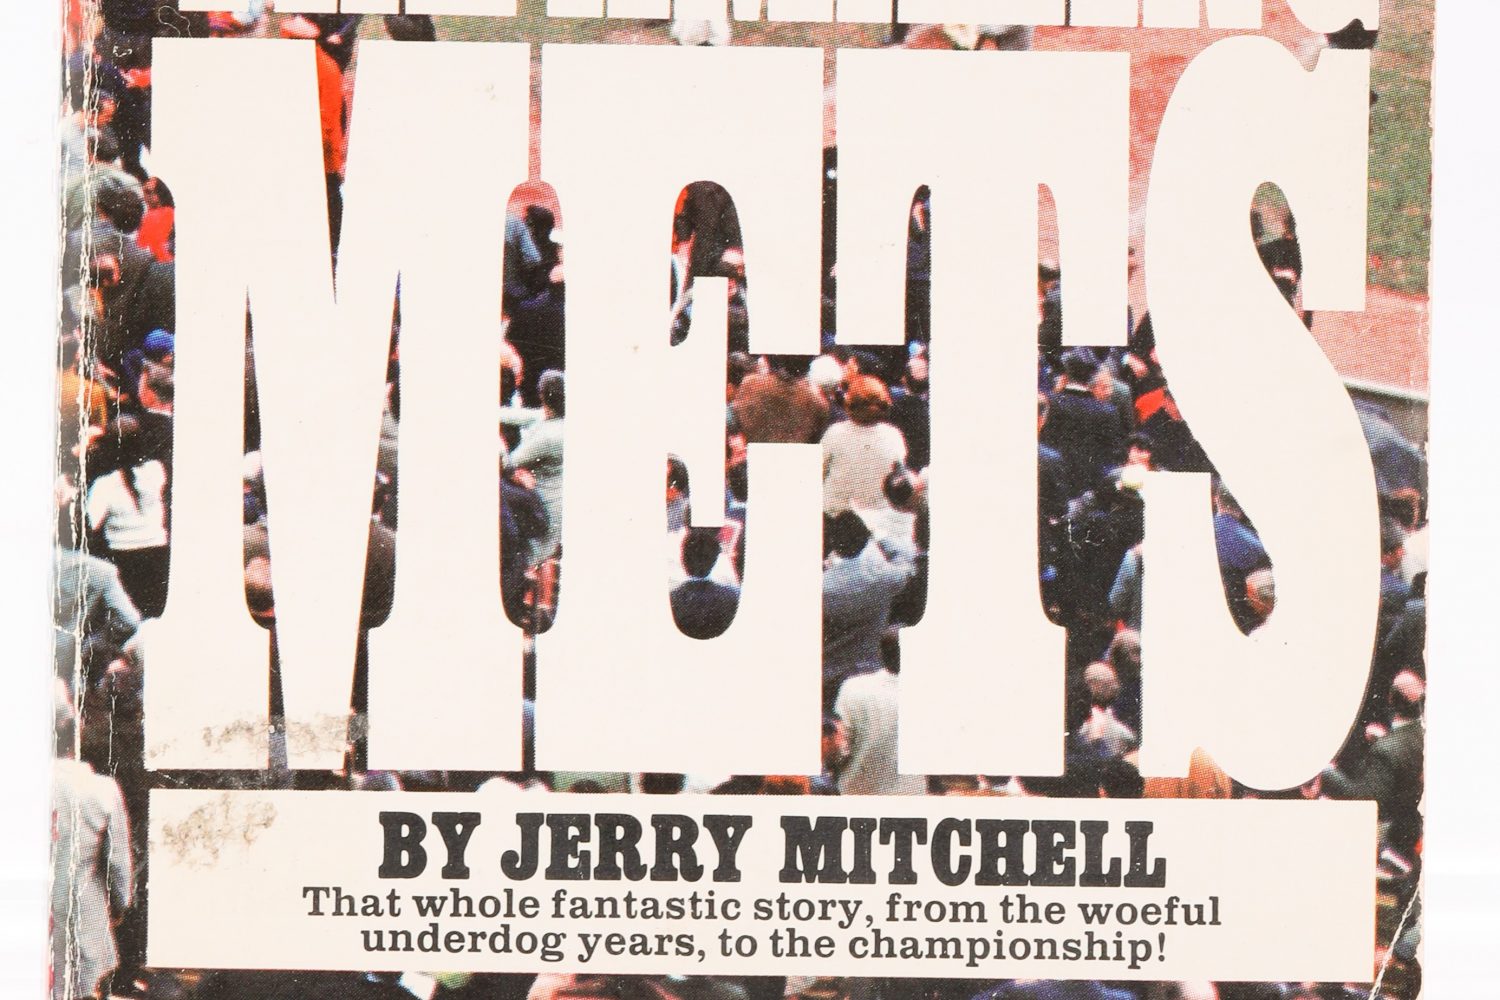 The Amazing Mets by Jerry Mitchell